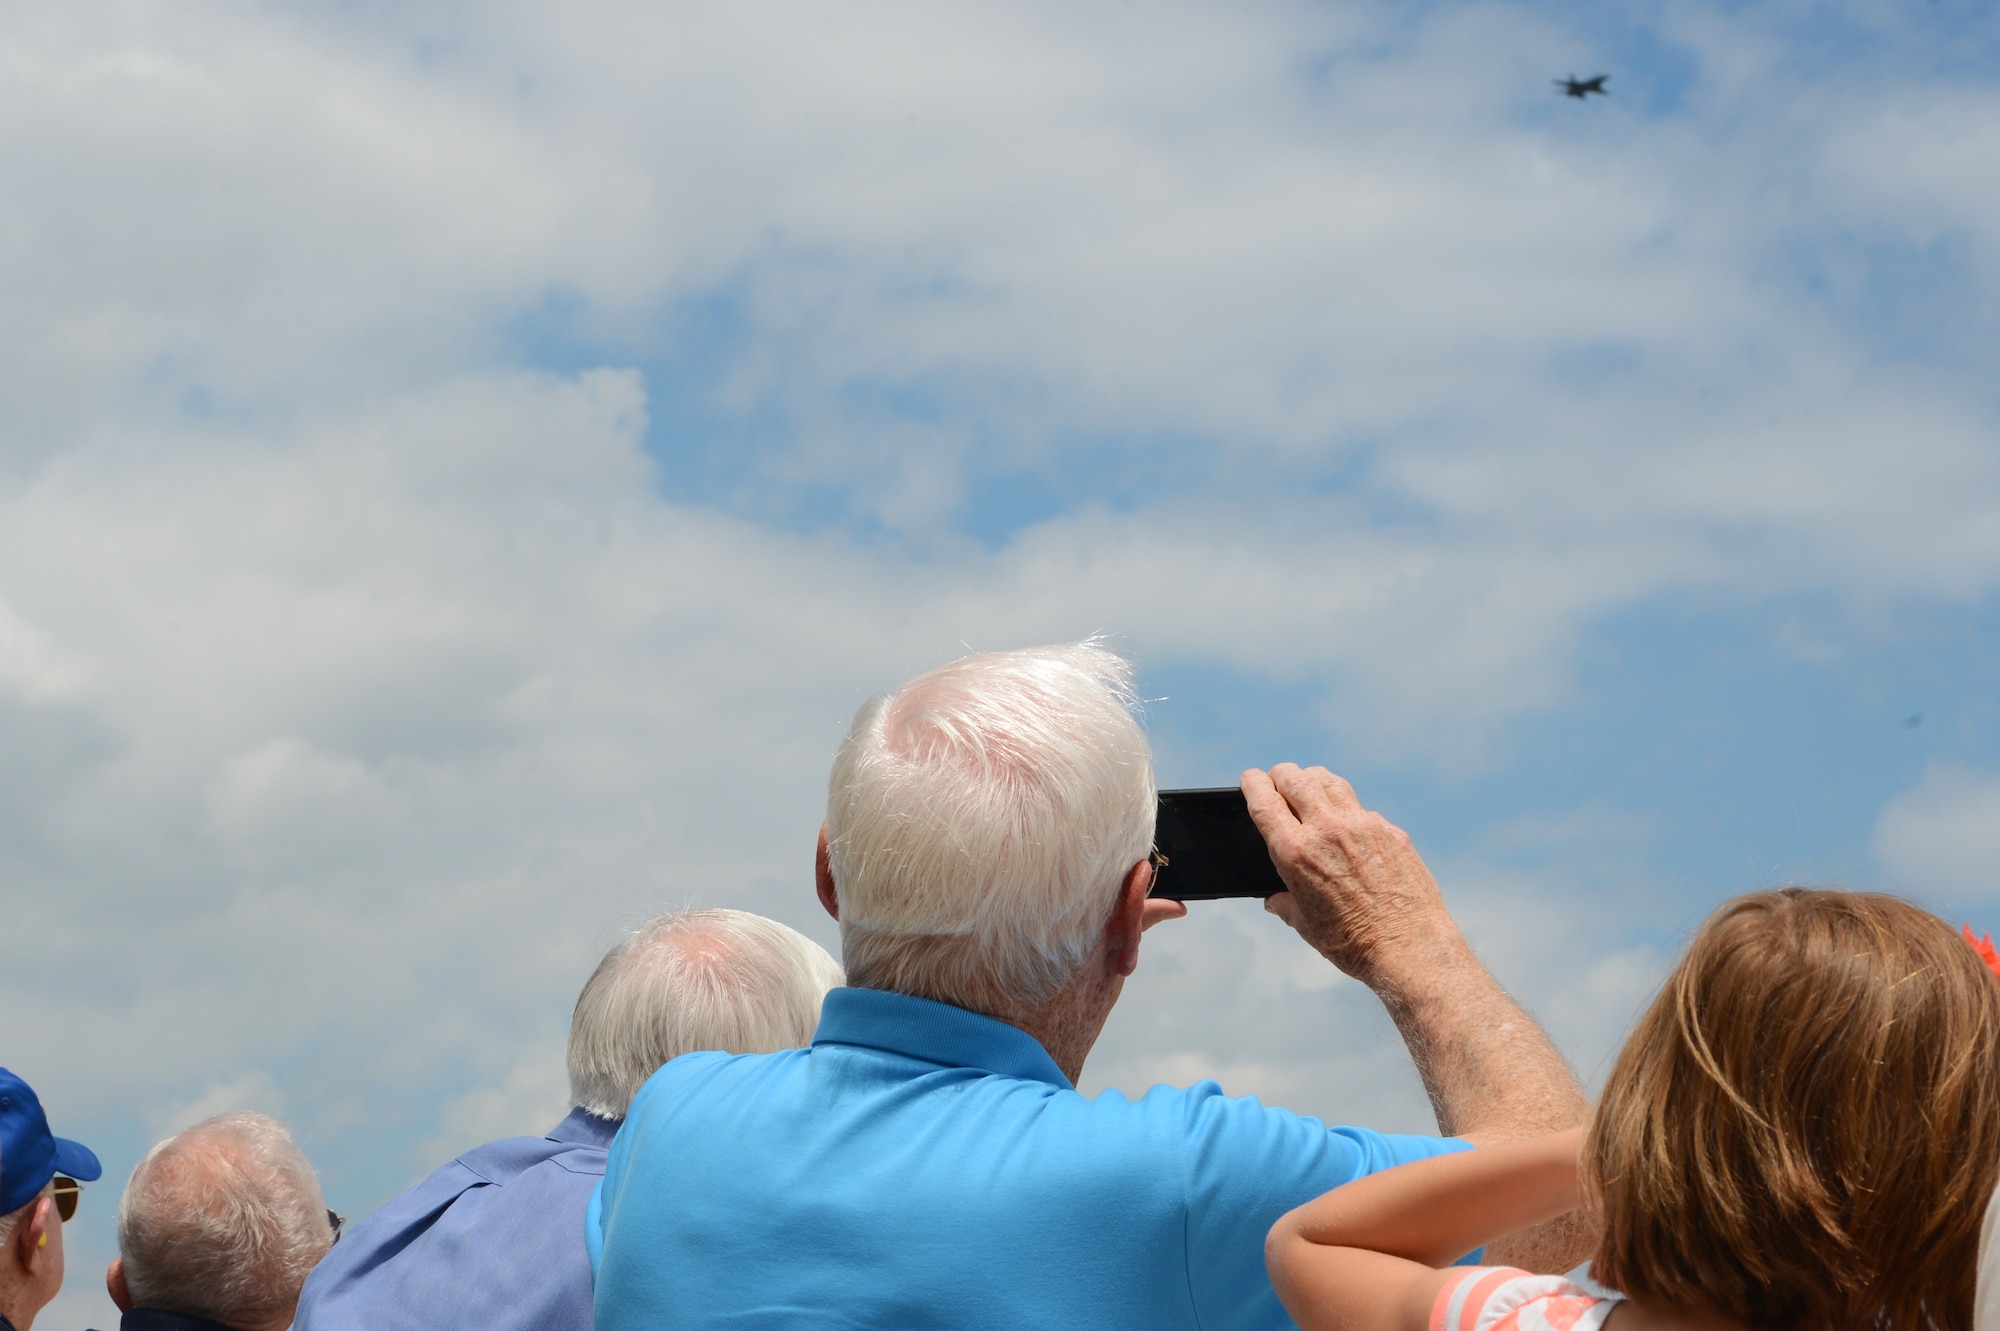 A retired U.S. Air Force Wild Weasel takes a photo of the 20th Fighter Wing Viper Demo Team at Shaw Air Force Base, S.C., June 5, 2015. The Wild Weasels were given the opportunity to watch the Viper Demo Team in action over the skies of Shaw during their tour at the base. (U.S. Air Force photo by Senior Airman Jonathan Bass/Released)